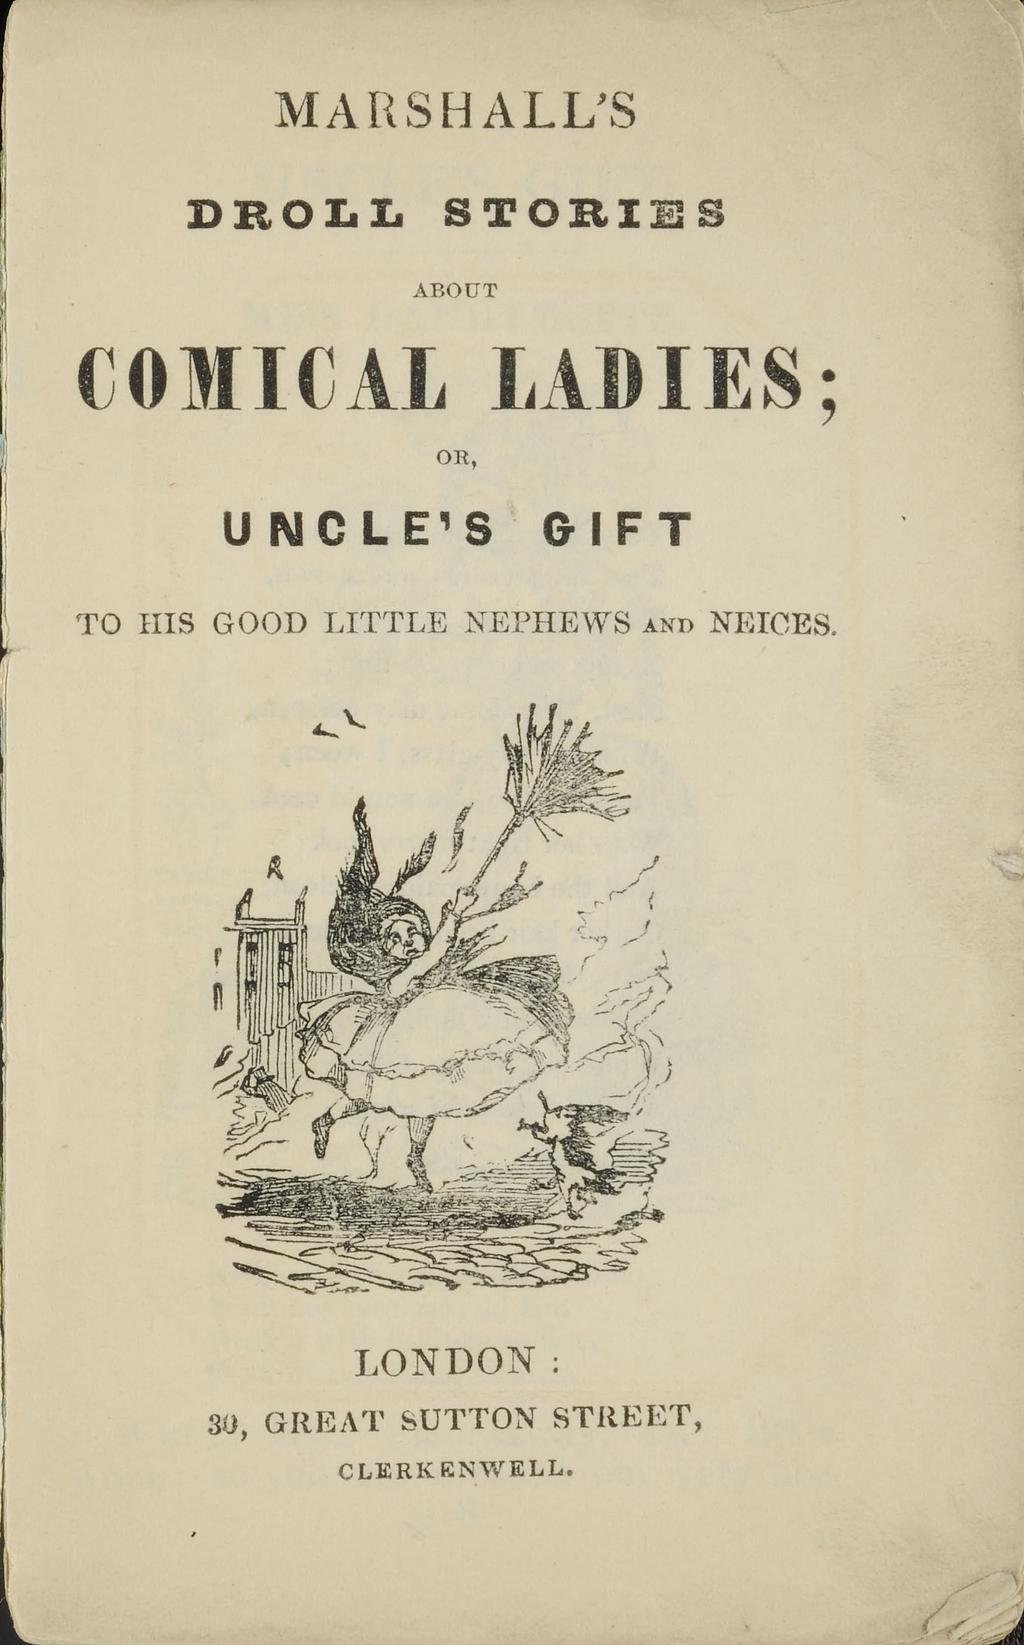 MARSHALL'S D R O L L S T O R I E S ABOUT COMICAL LADIES; OR, UNCLE'S GIFT TO